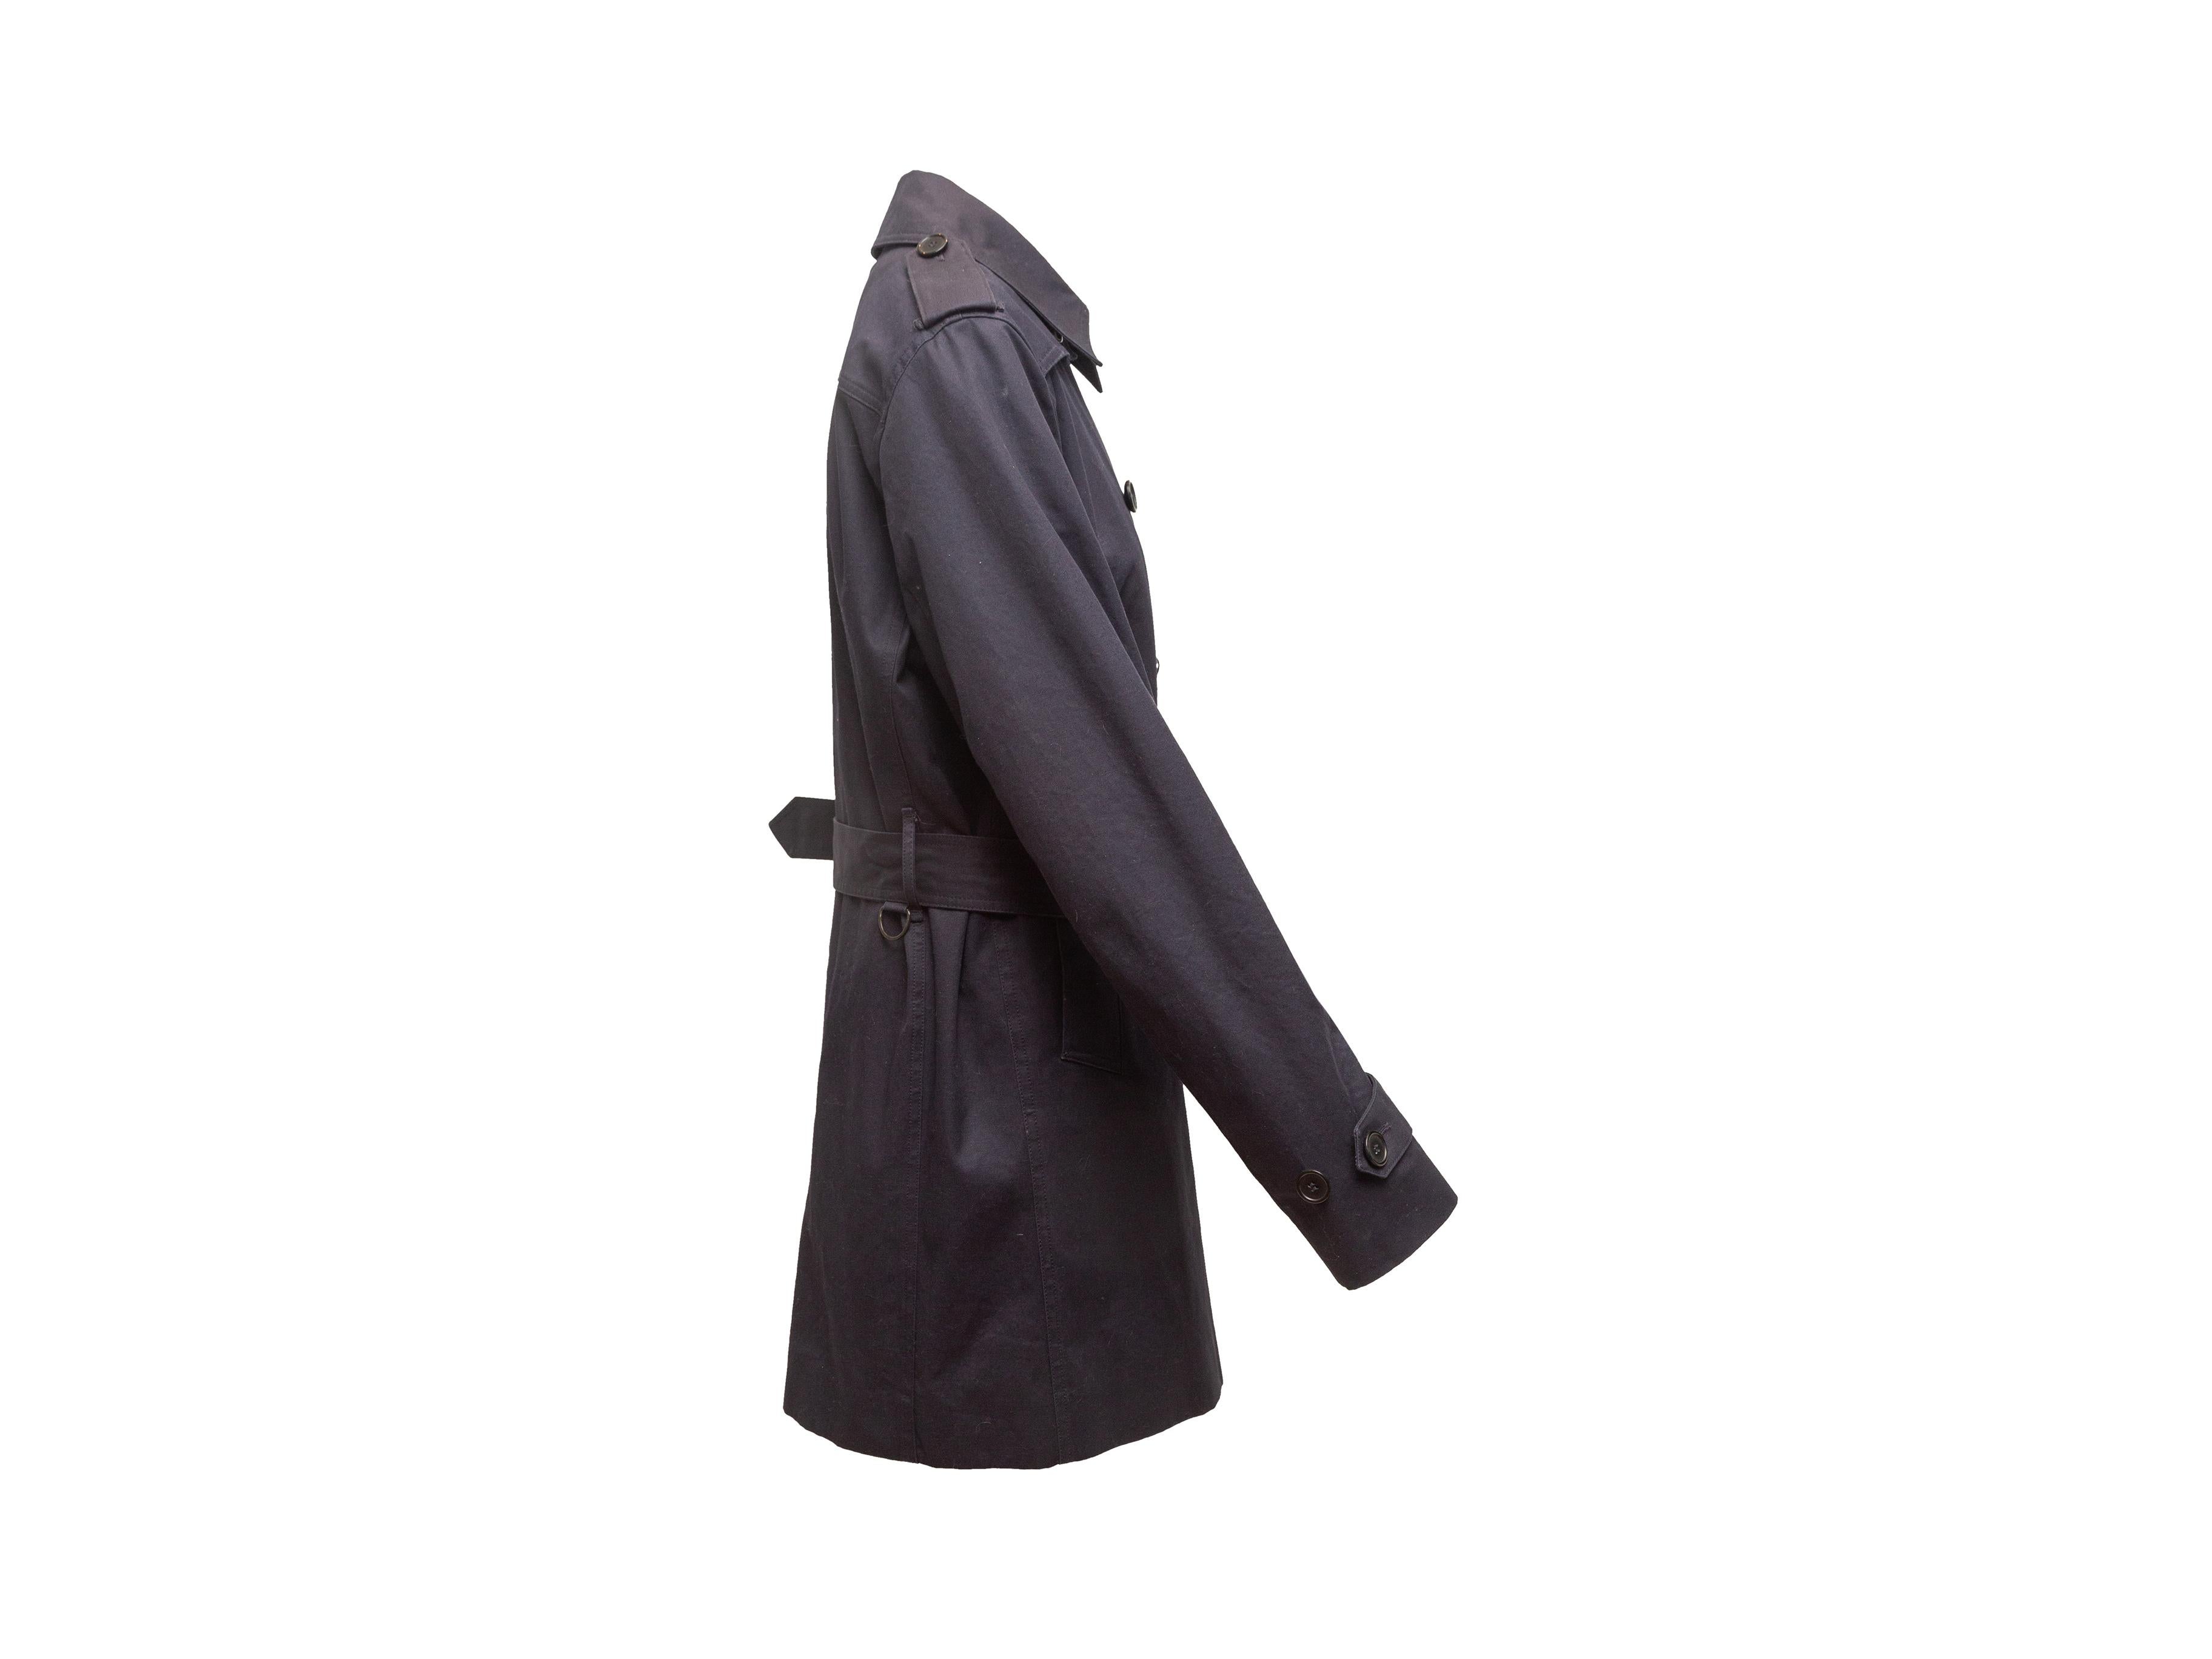 Product details: Navy double-breasted long trench coat by Sandro. Pointed collar. Dual hip pockets. Belt at waist. Button closures at front. 37